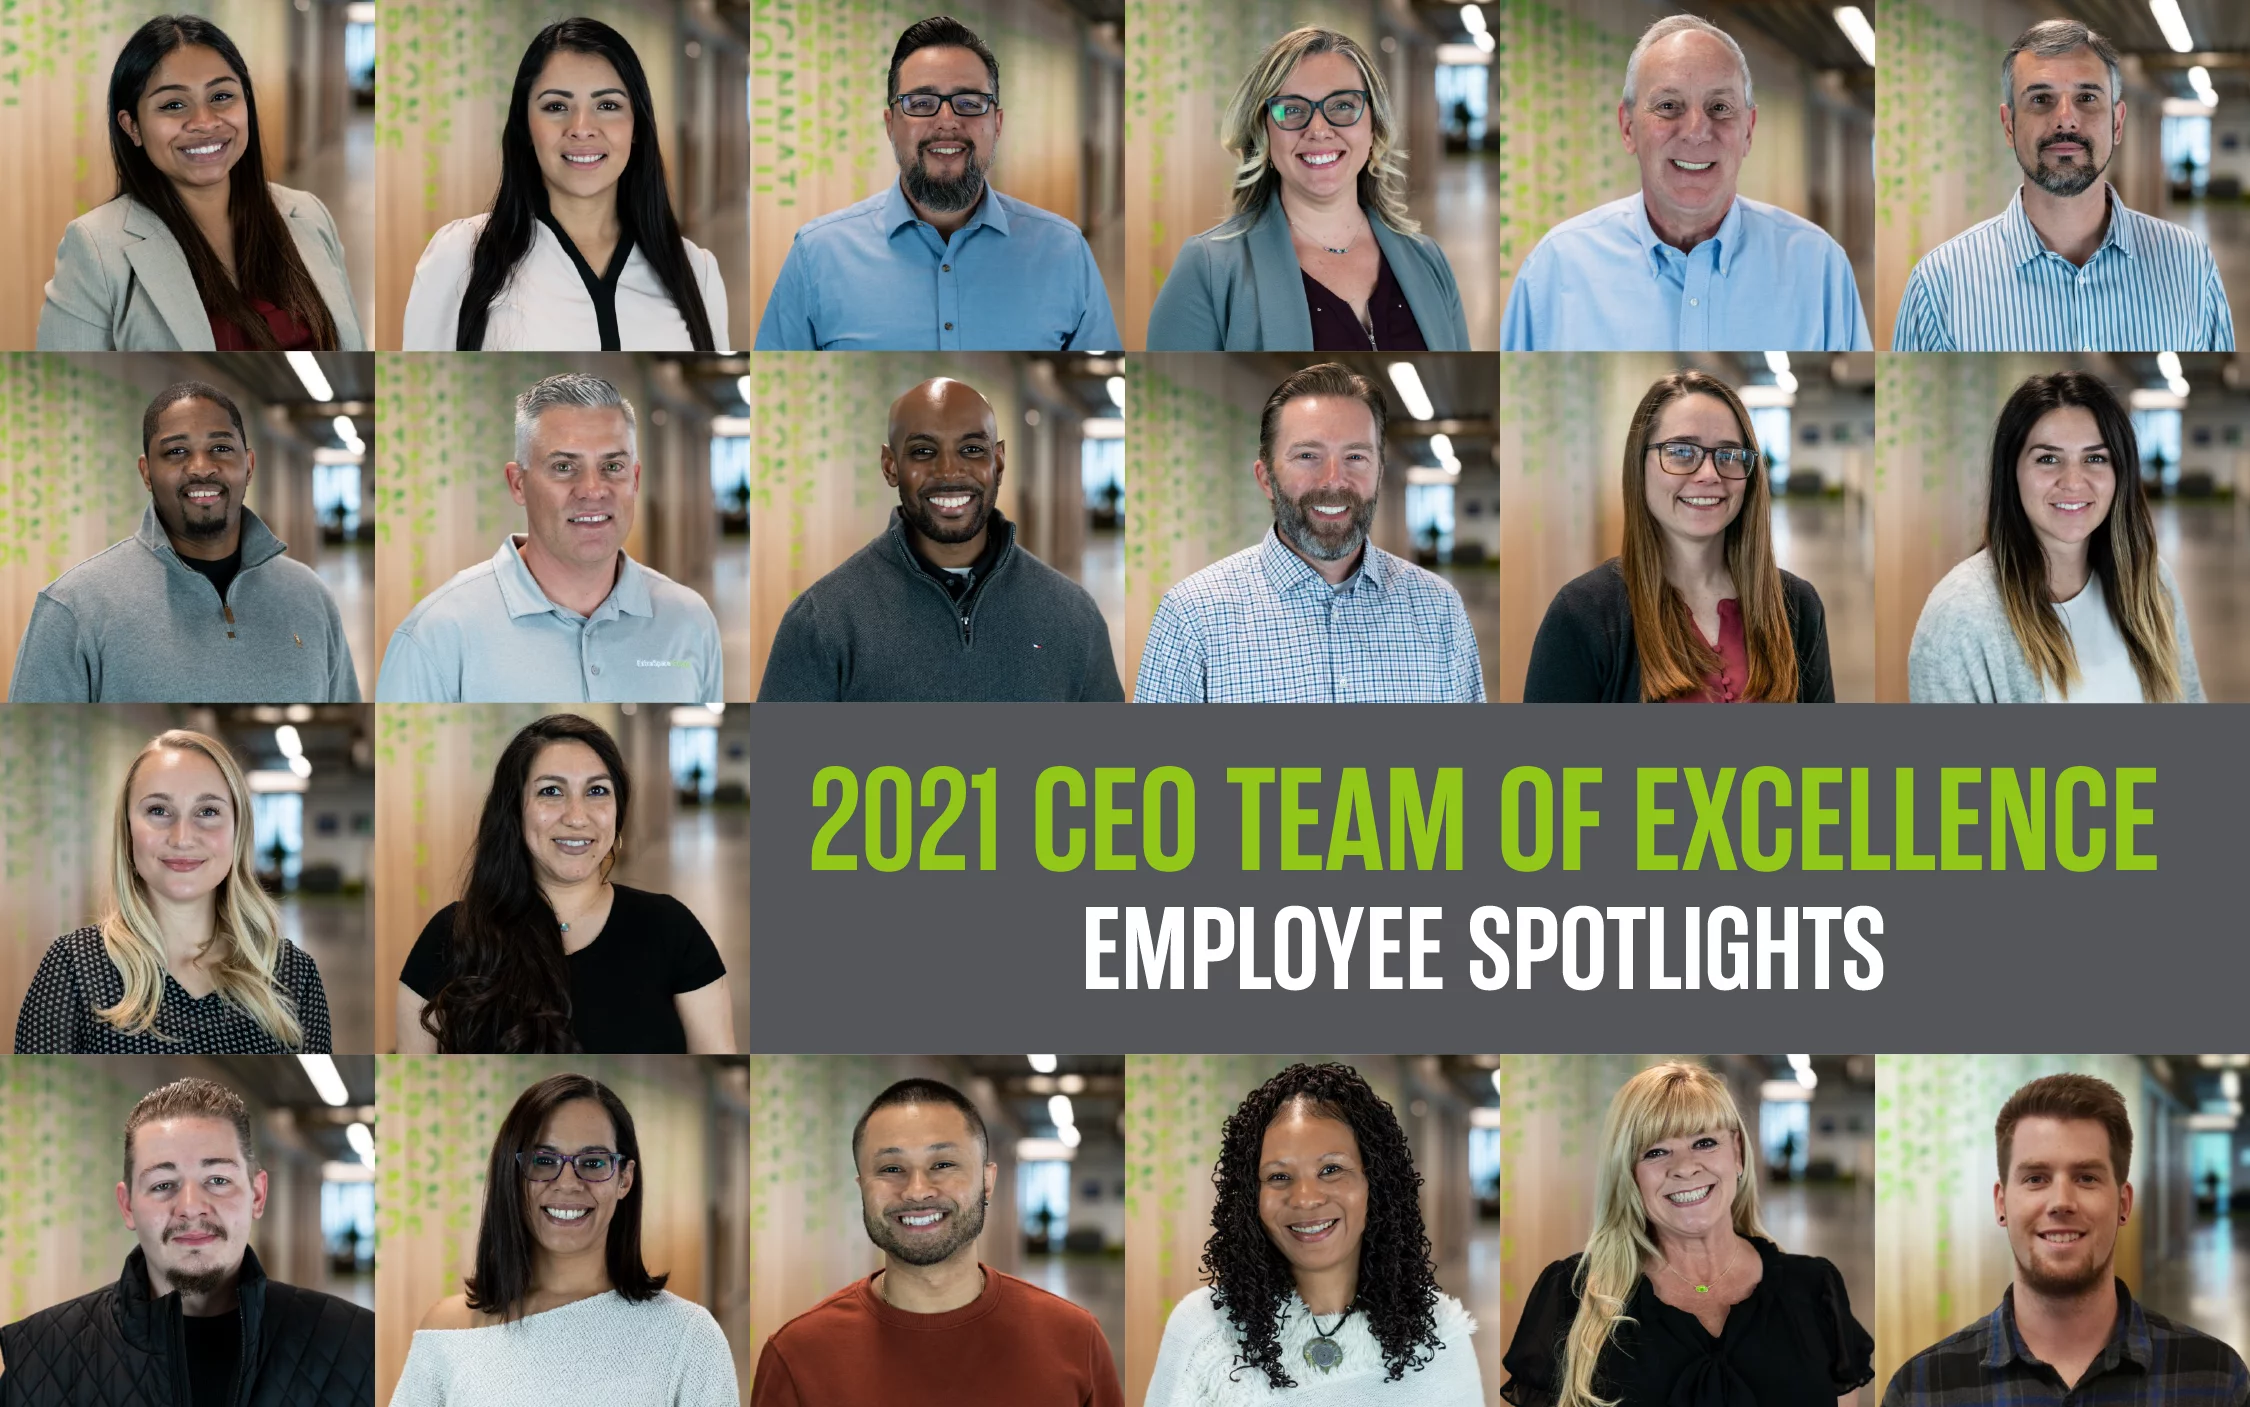 Headshots of 20 employees awarded CEO Team of Excellence Spotlight